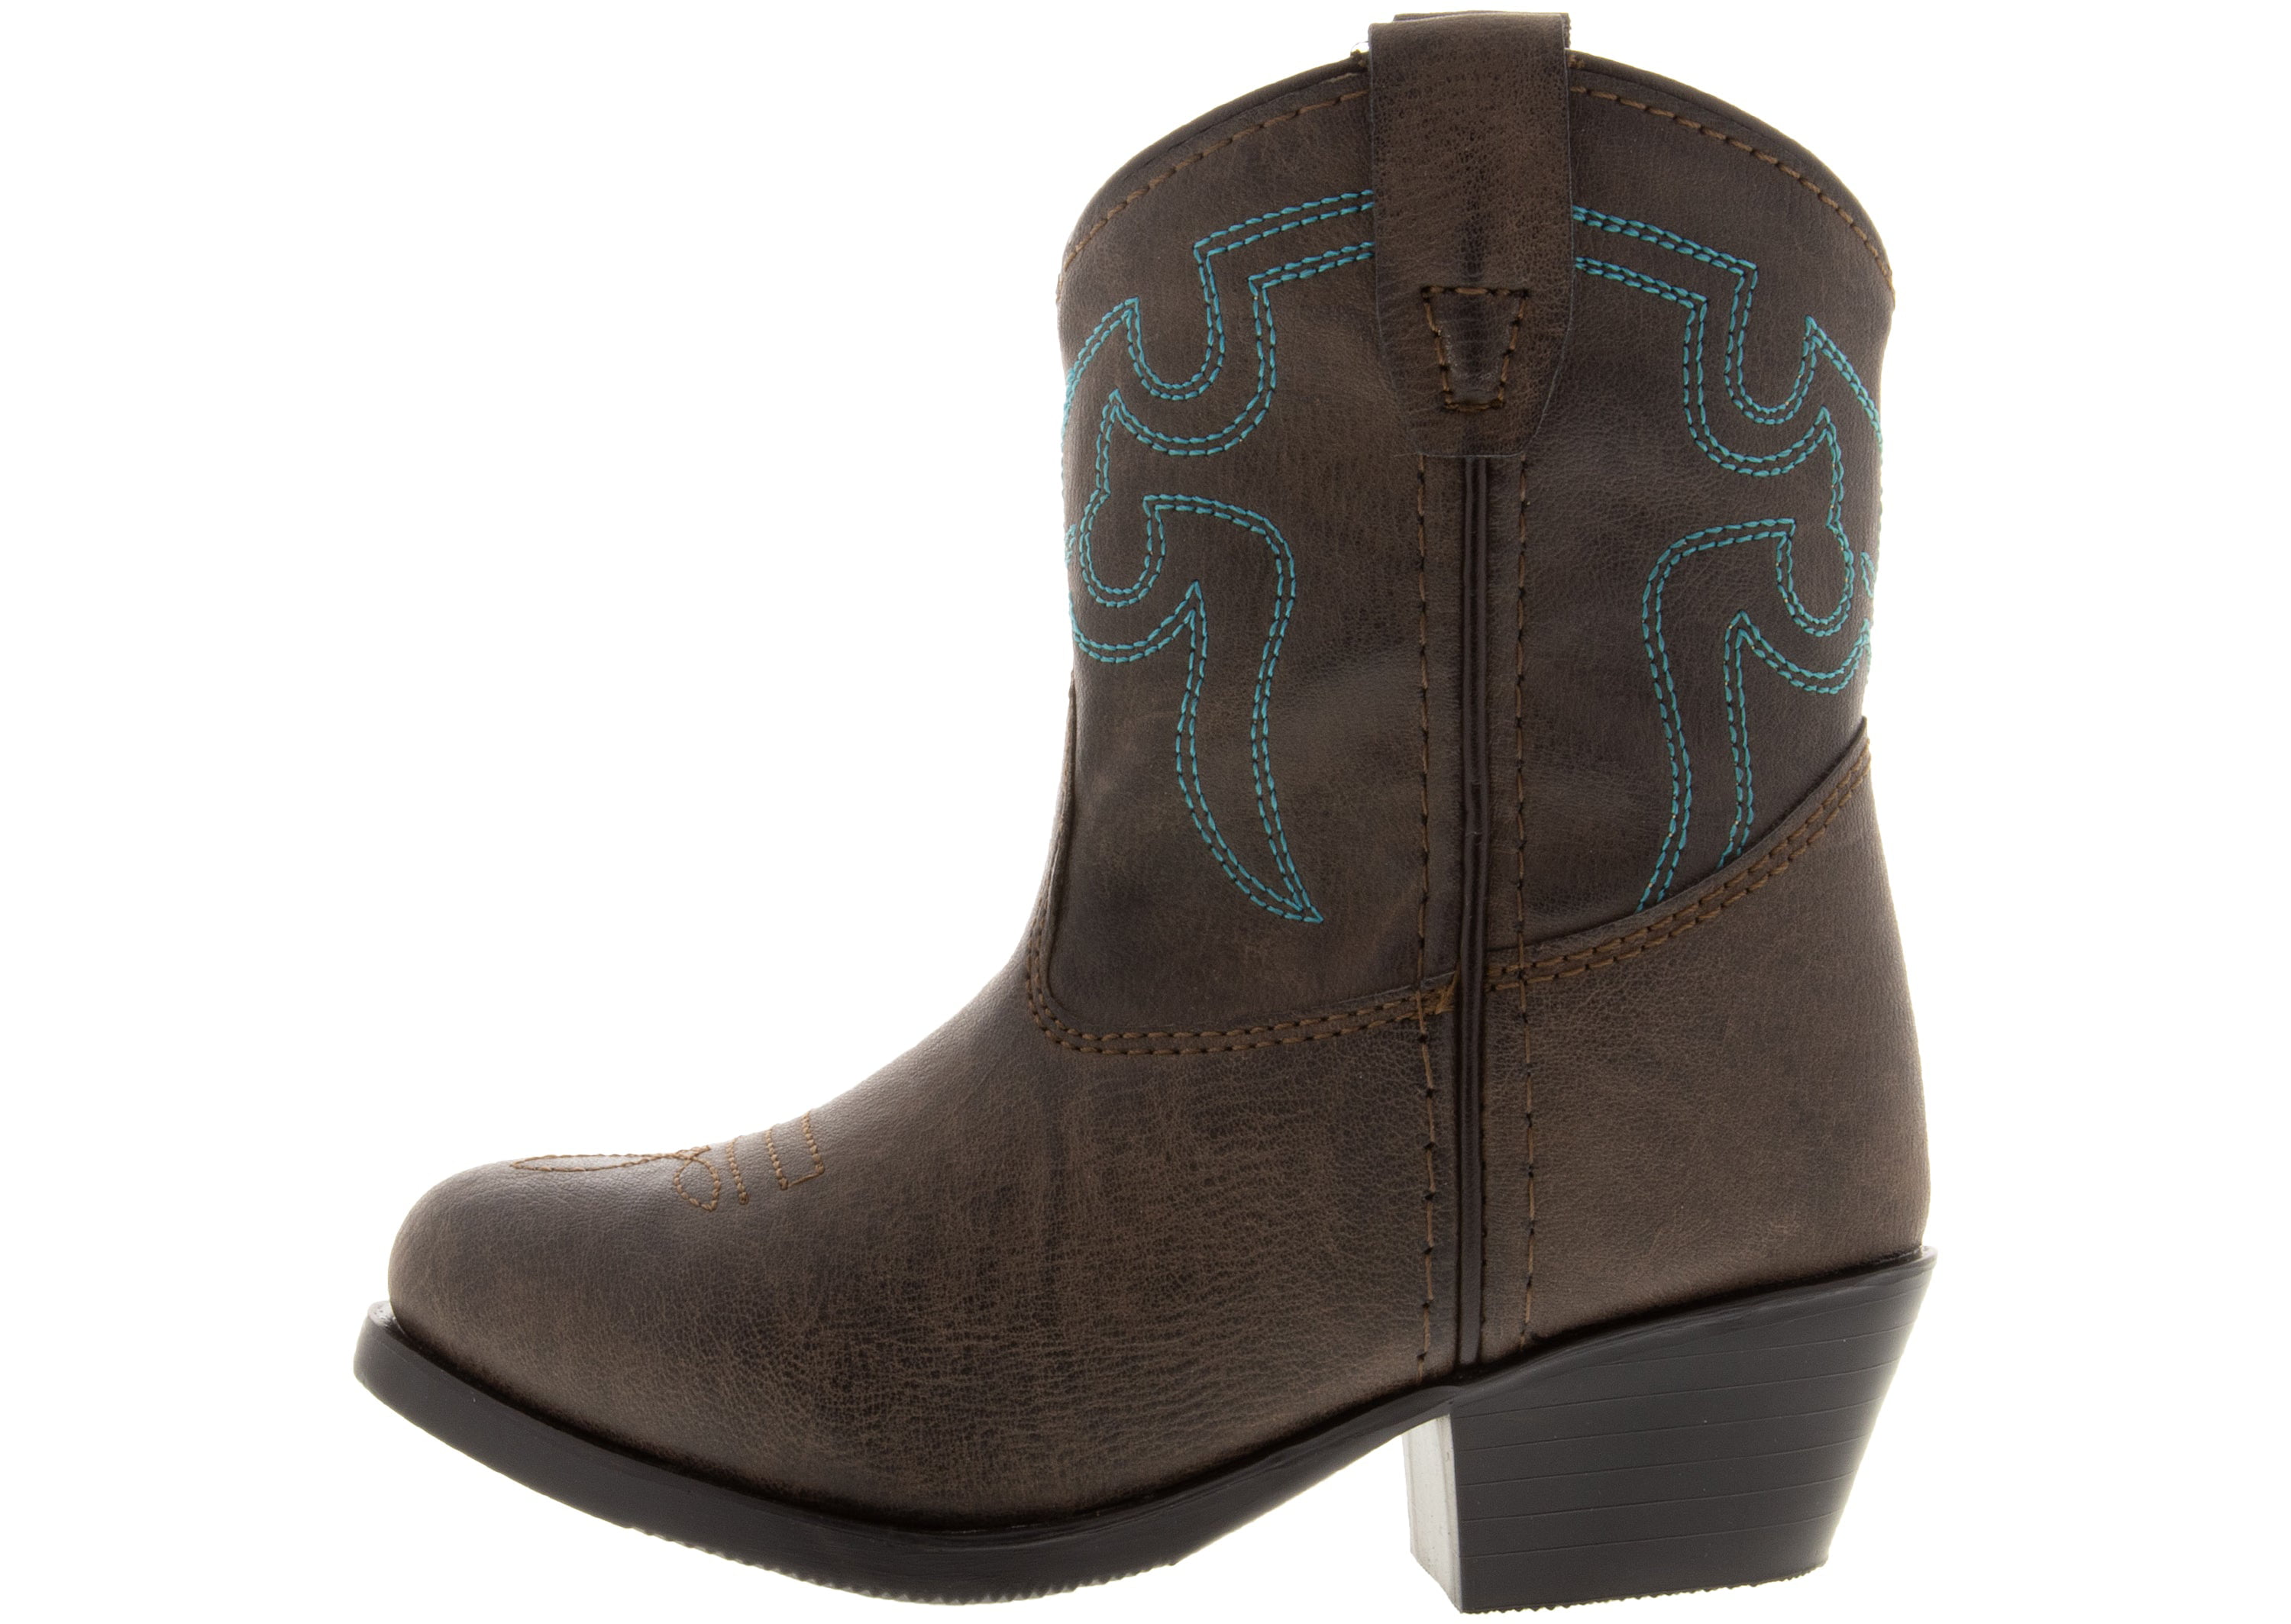 Smoky+Mountain+Boys+Brown+with+Blue+Stitch+Monterey+Western+Cowboy+Boots 